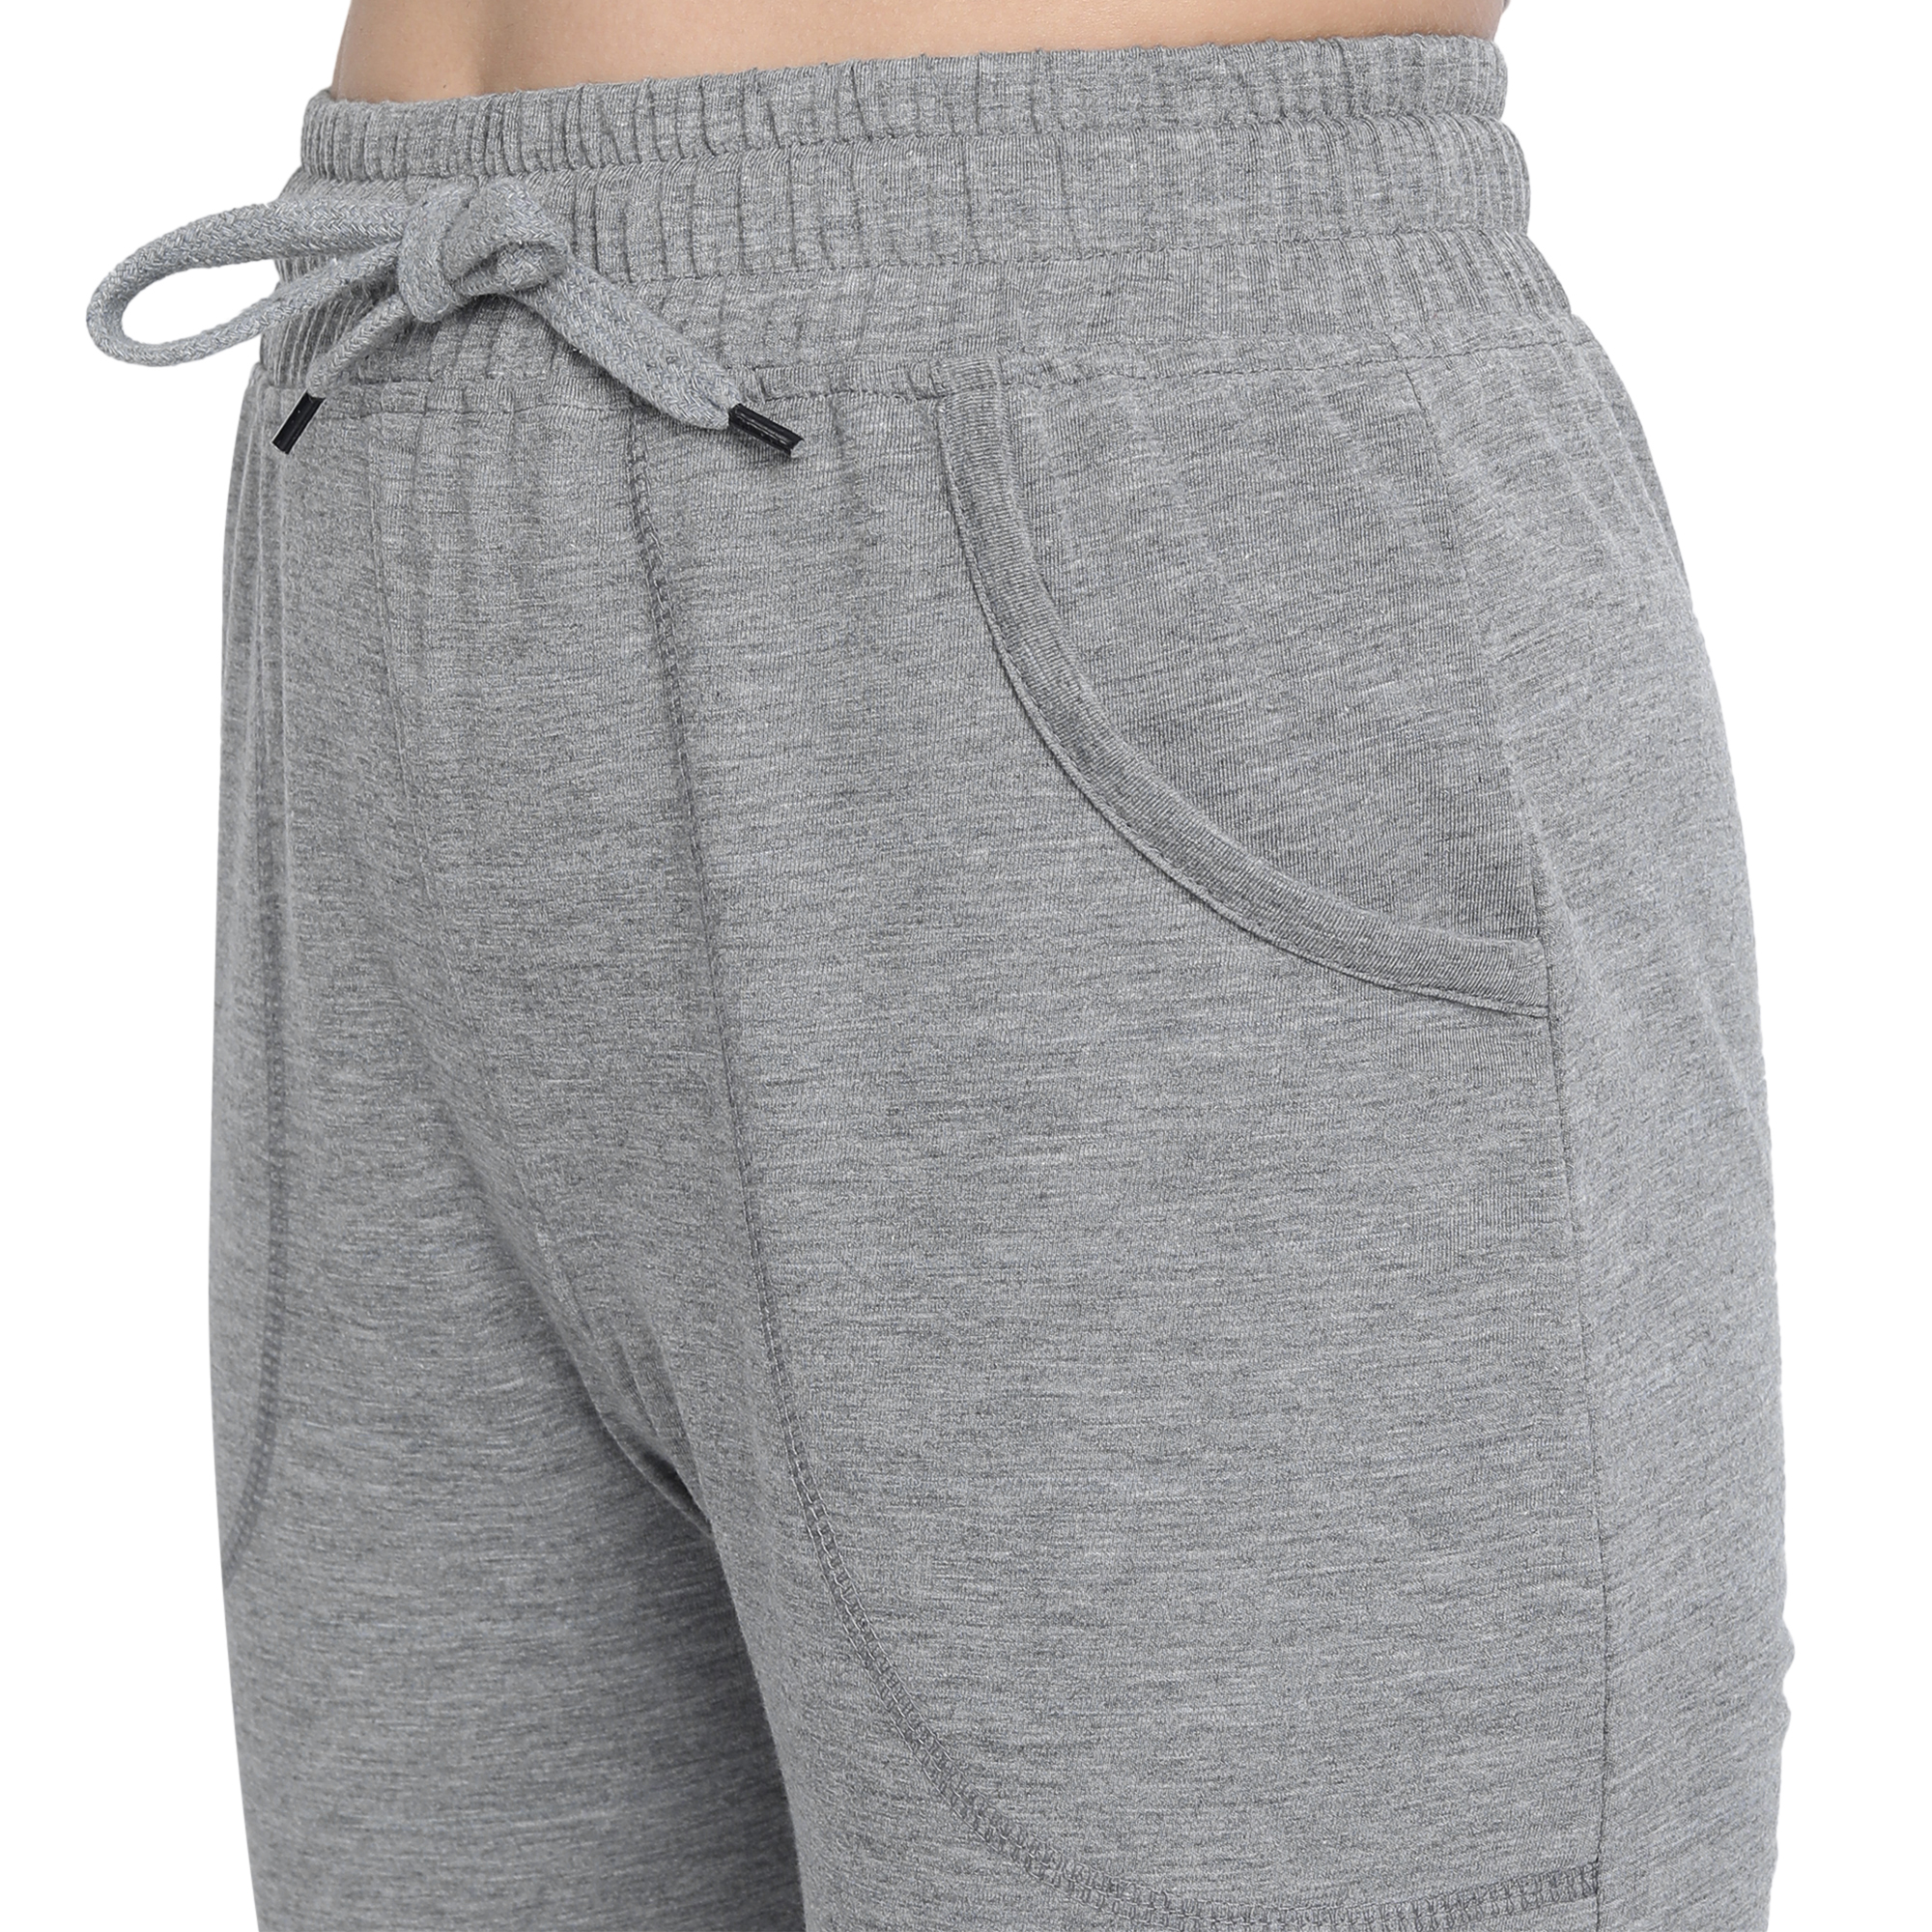 Regular fit Cotton Track Pants for Women's